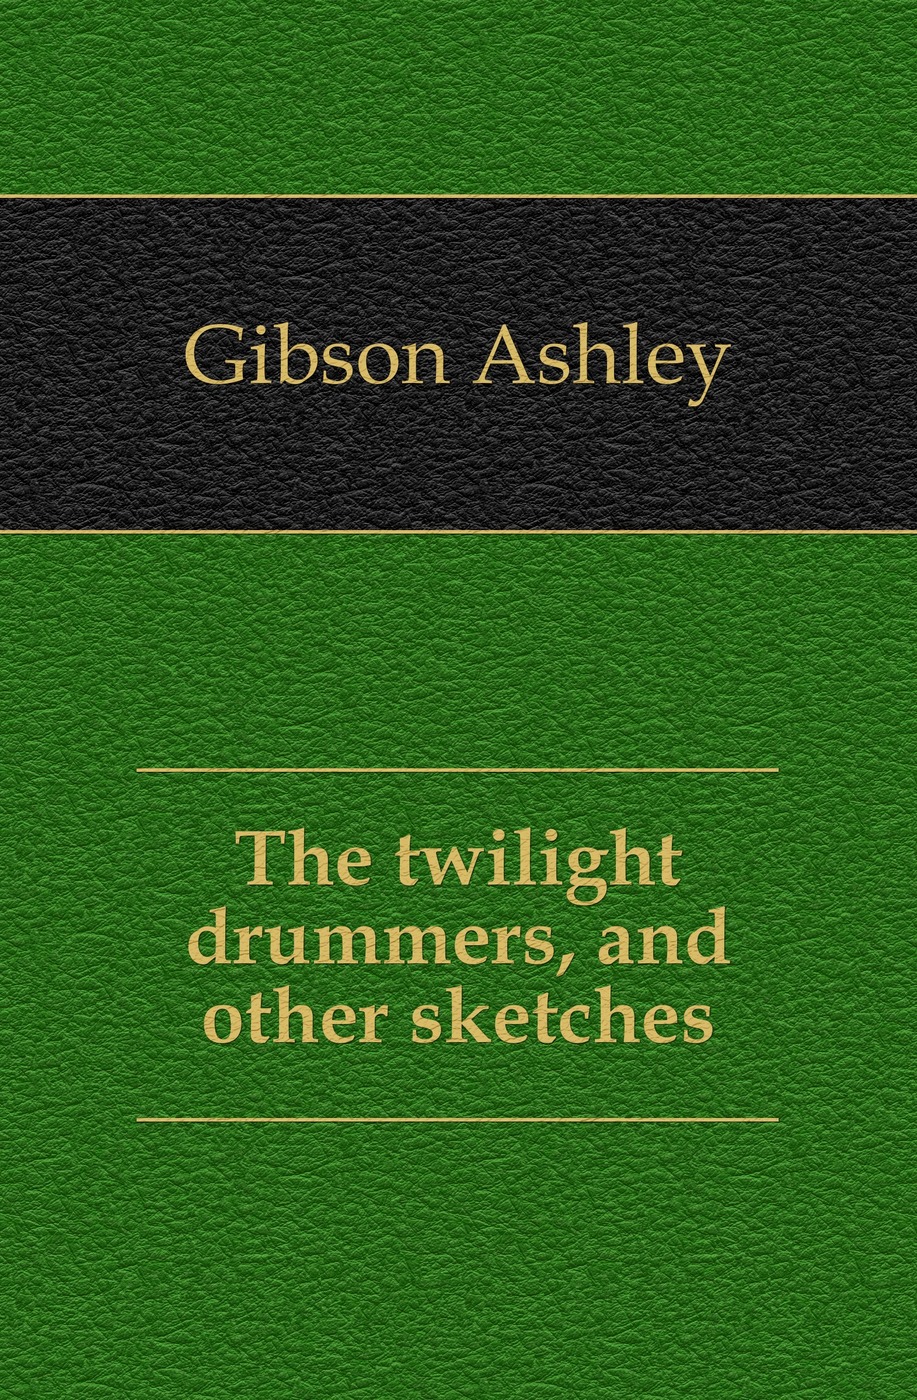 The twilight drummers, and other sketches